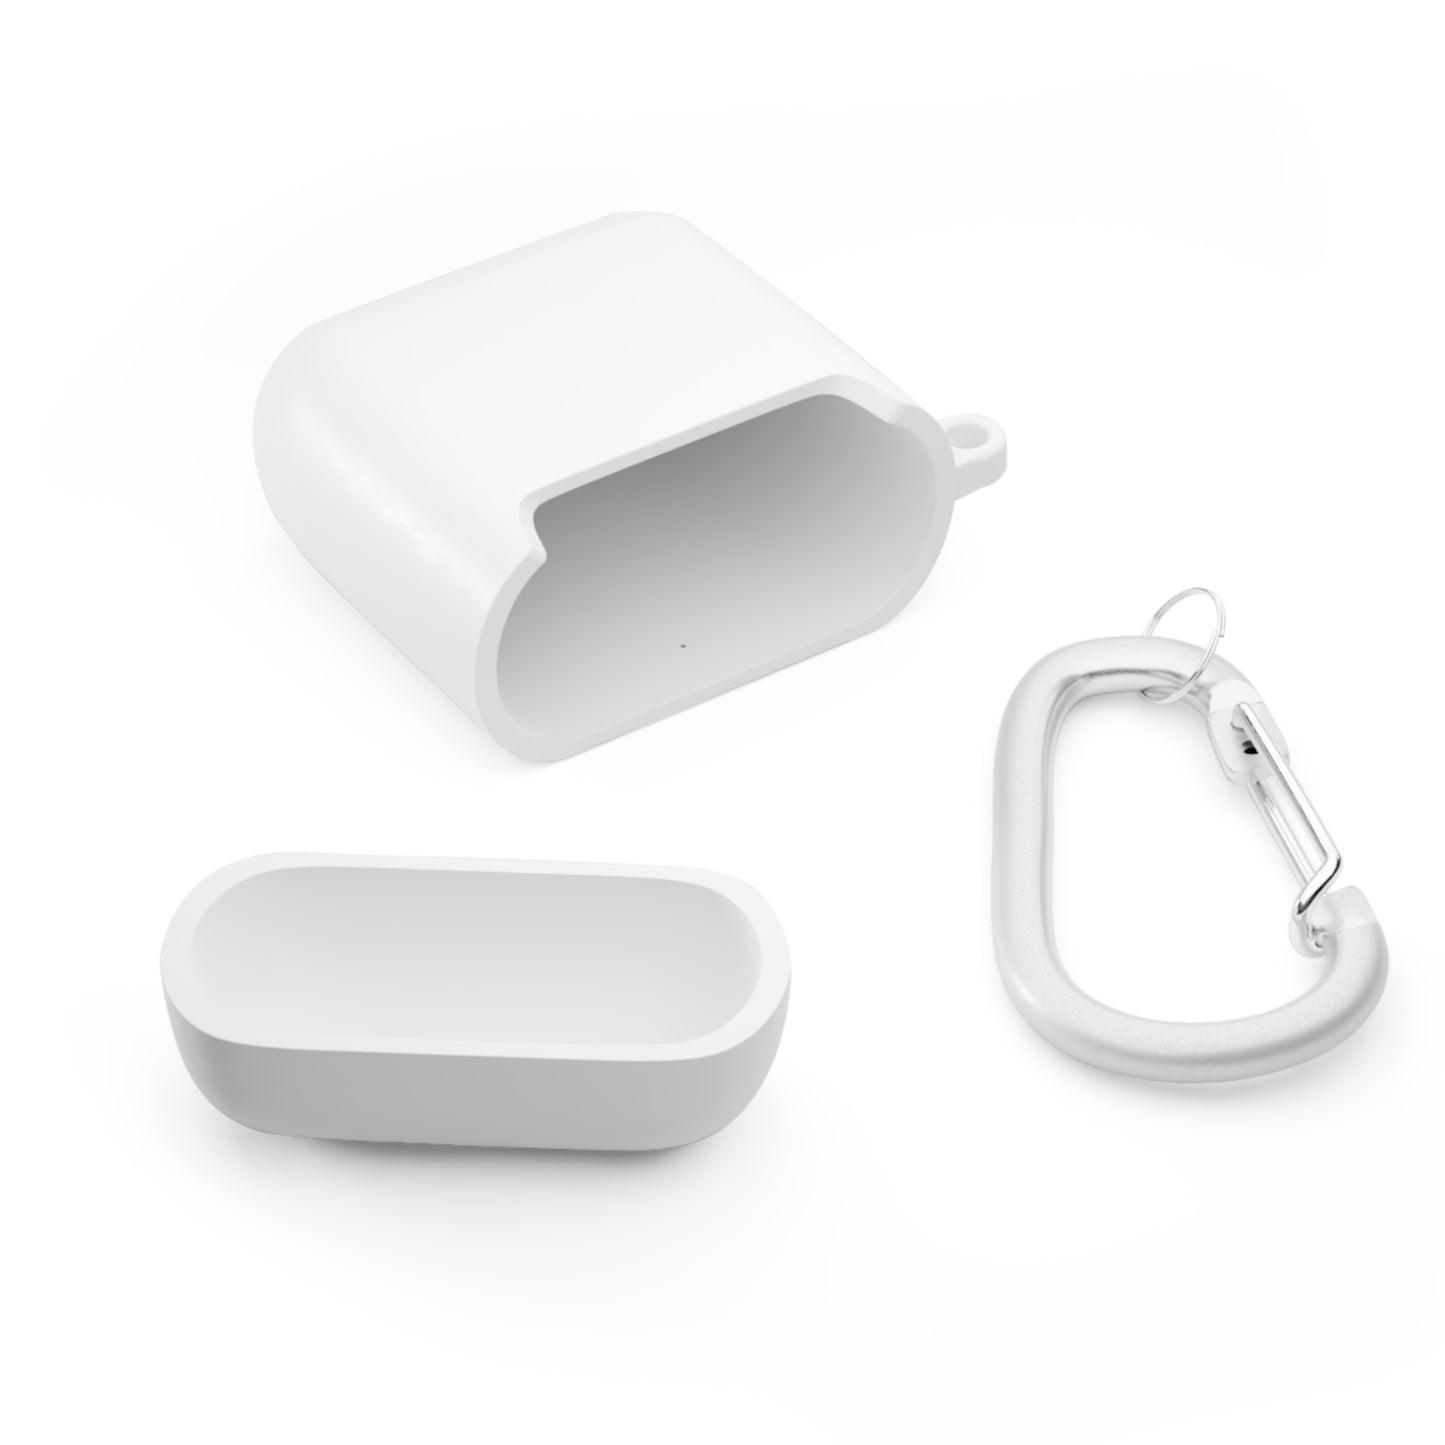 AirPods / AirPods Pro Case Cover - I Really Hate Working